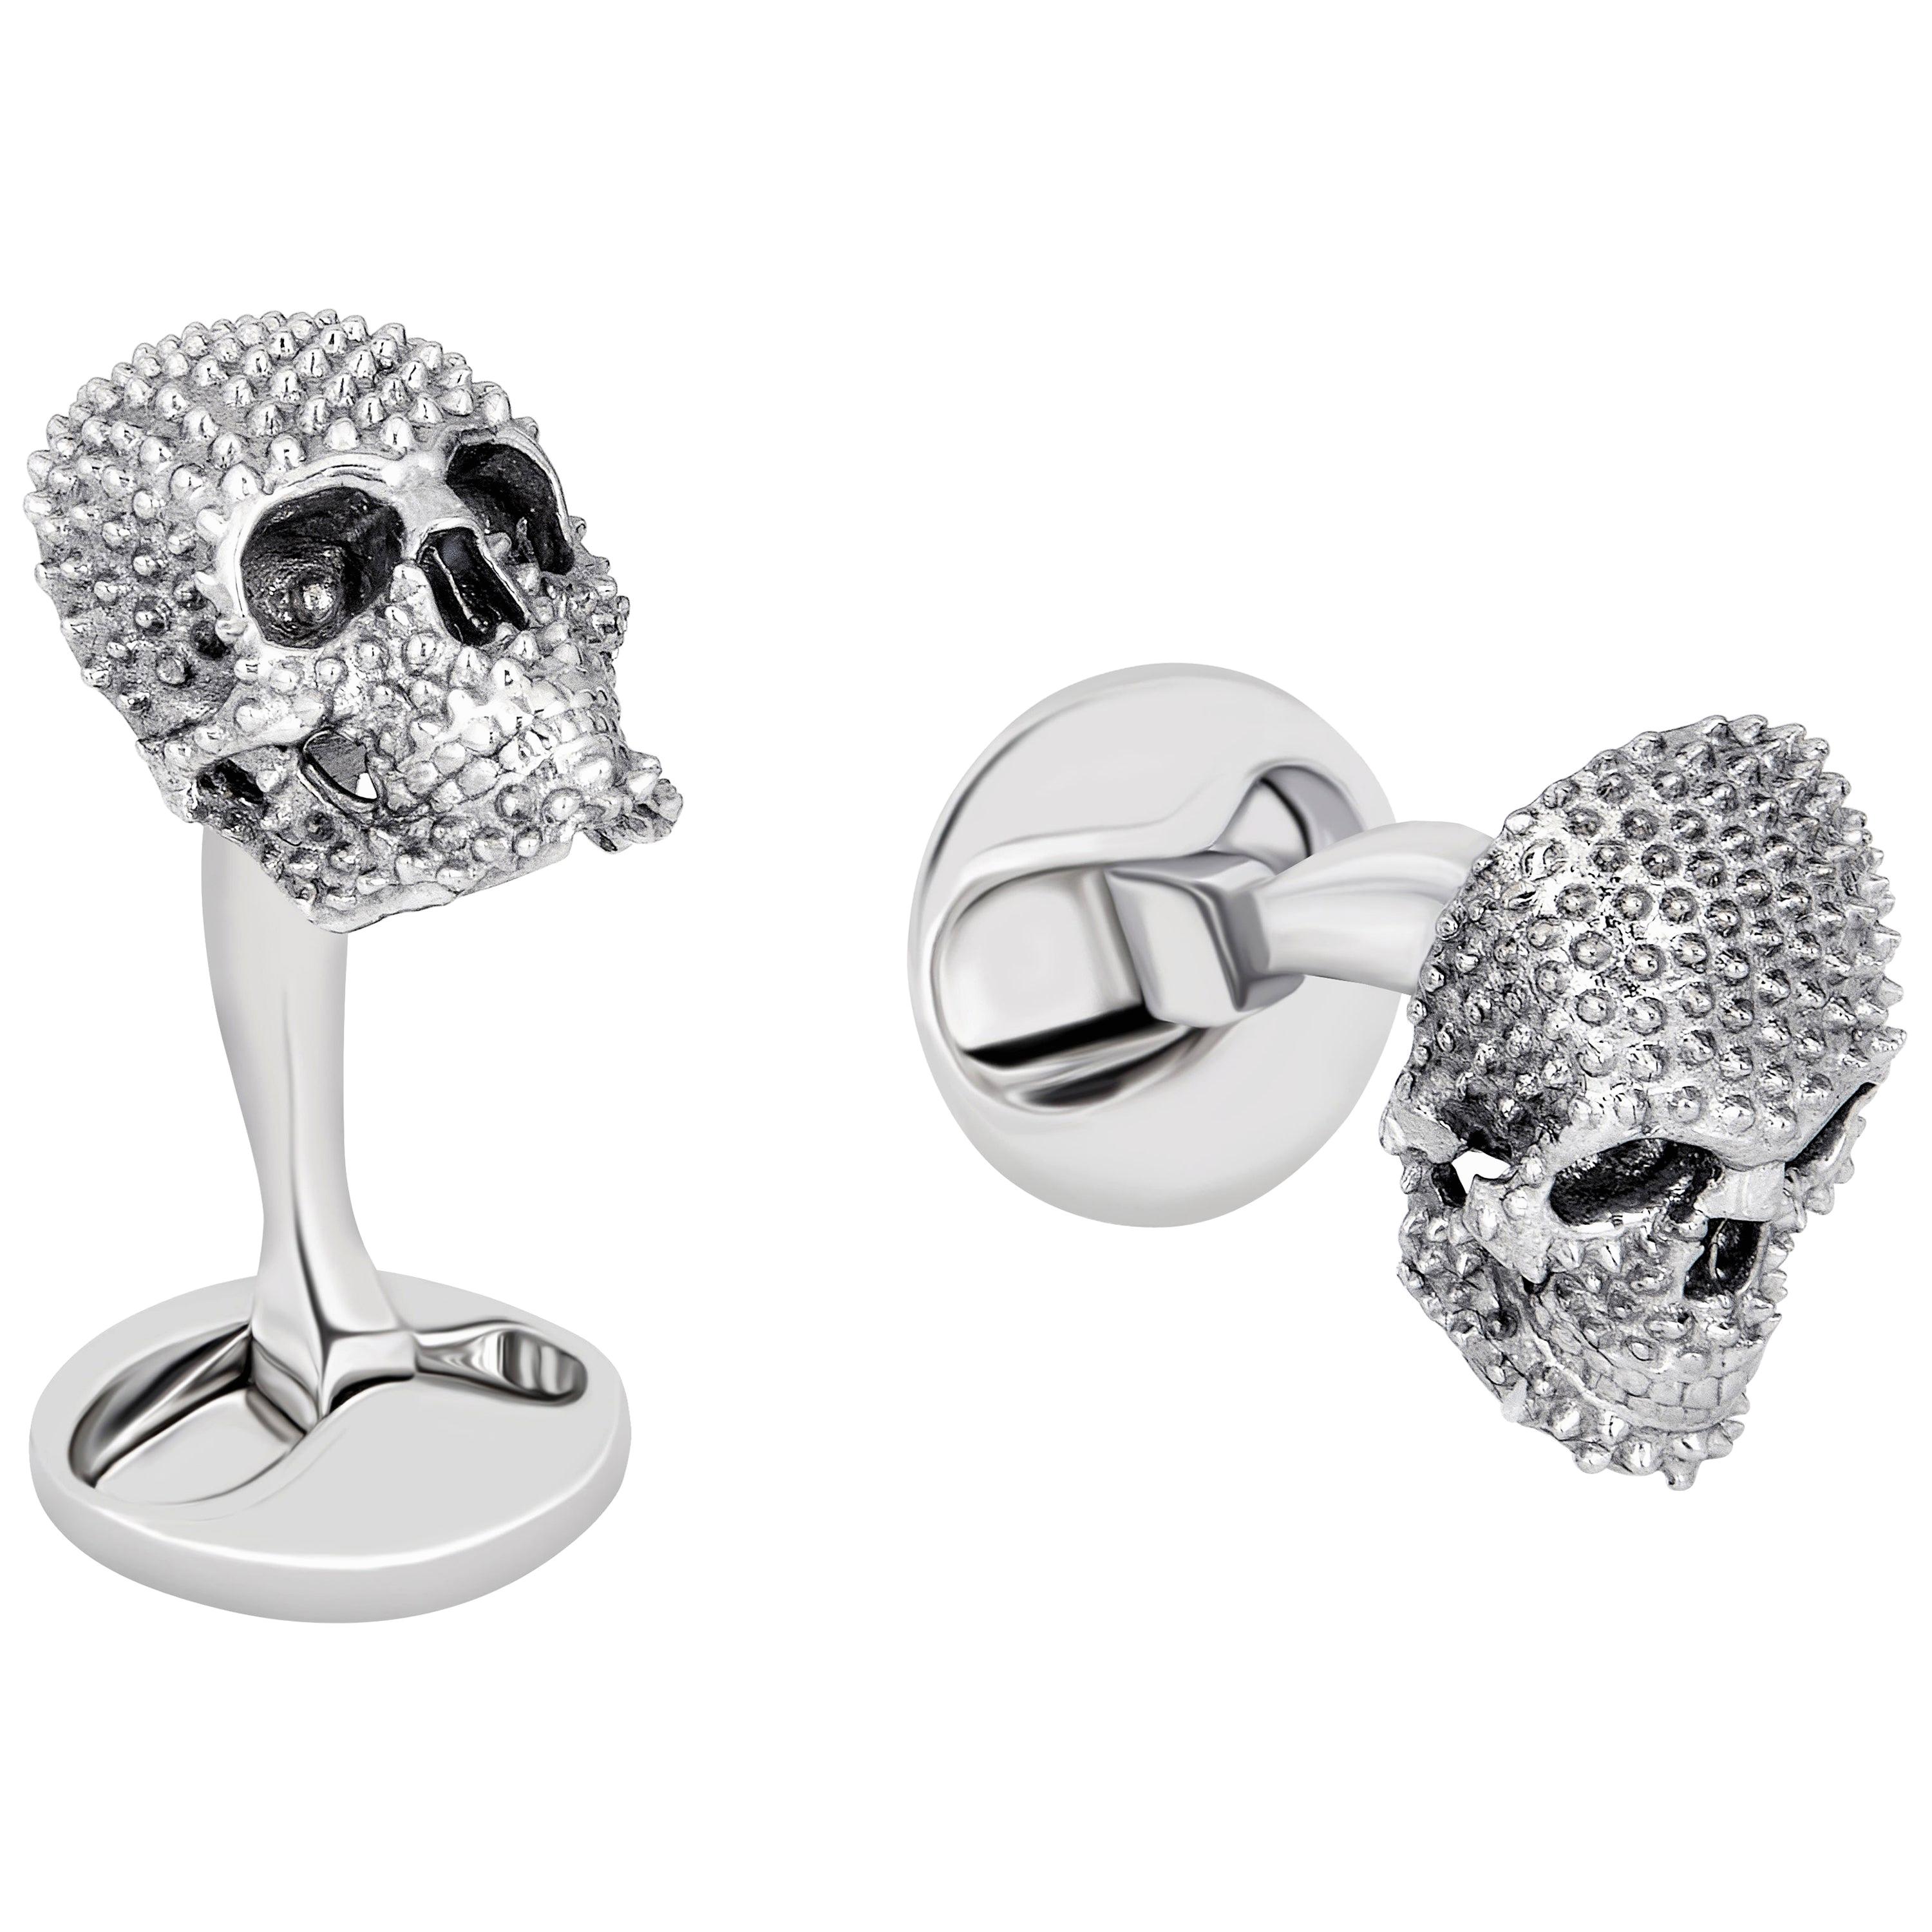 Studded Skull Cufflinks in Sterling Silver by Fils Unique